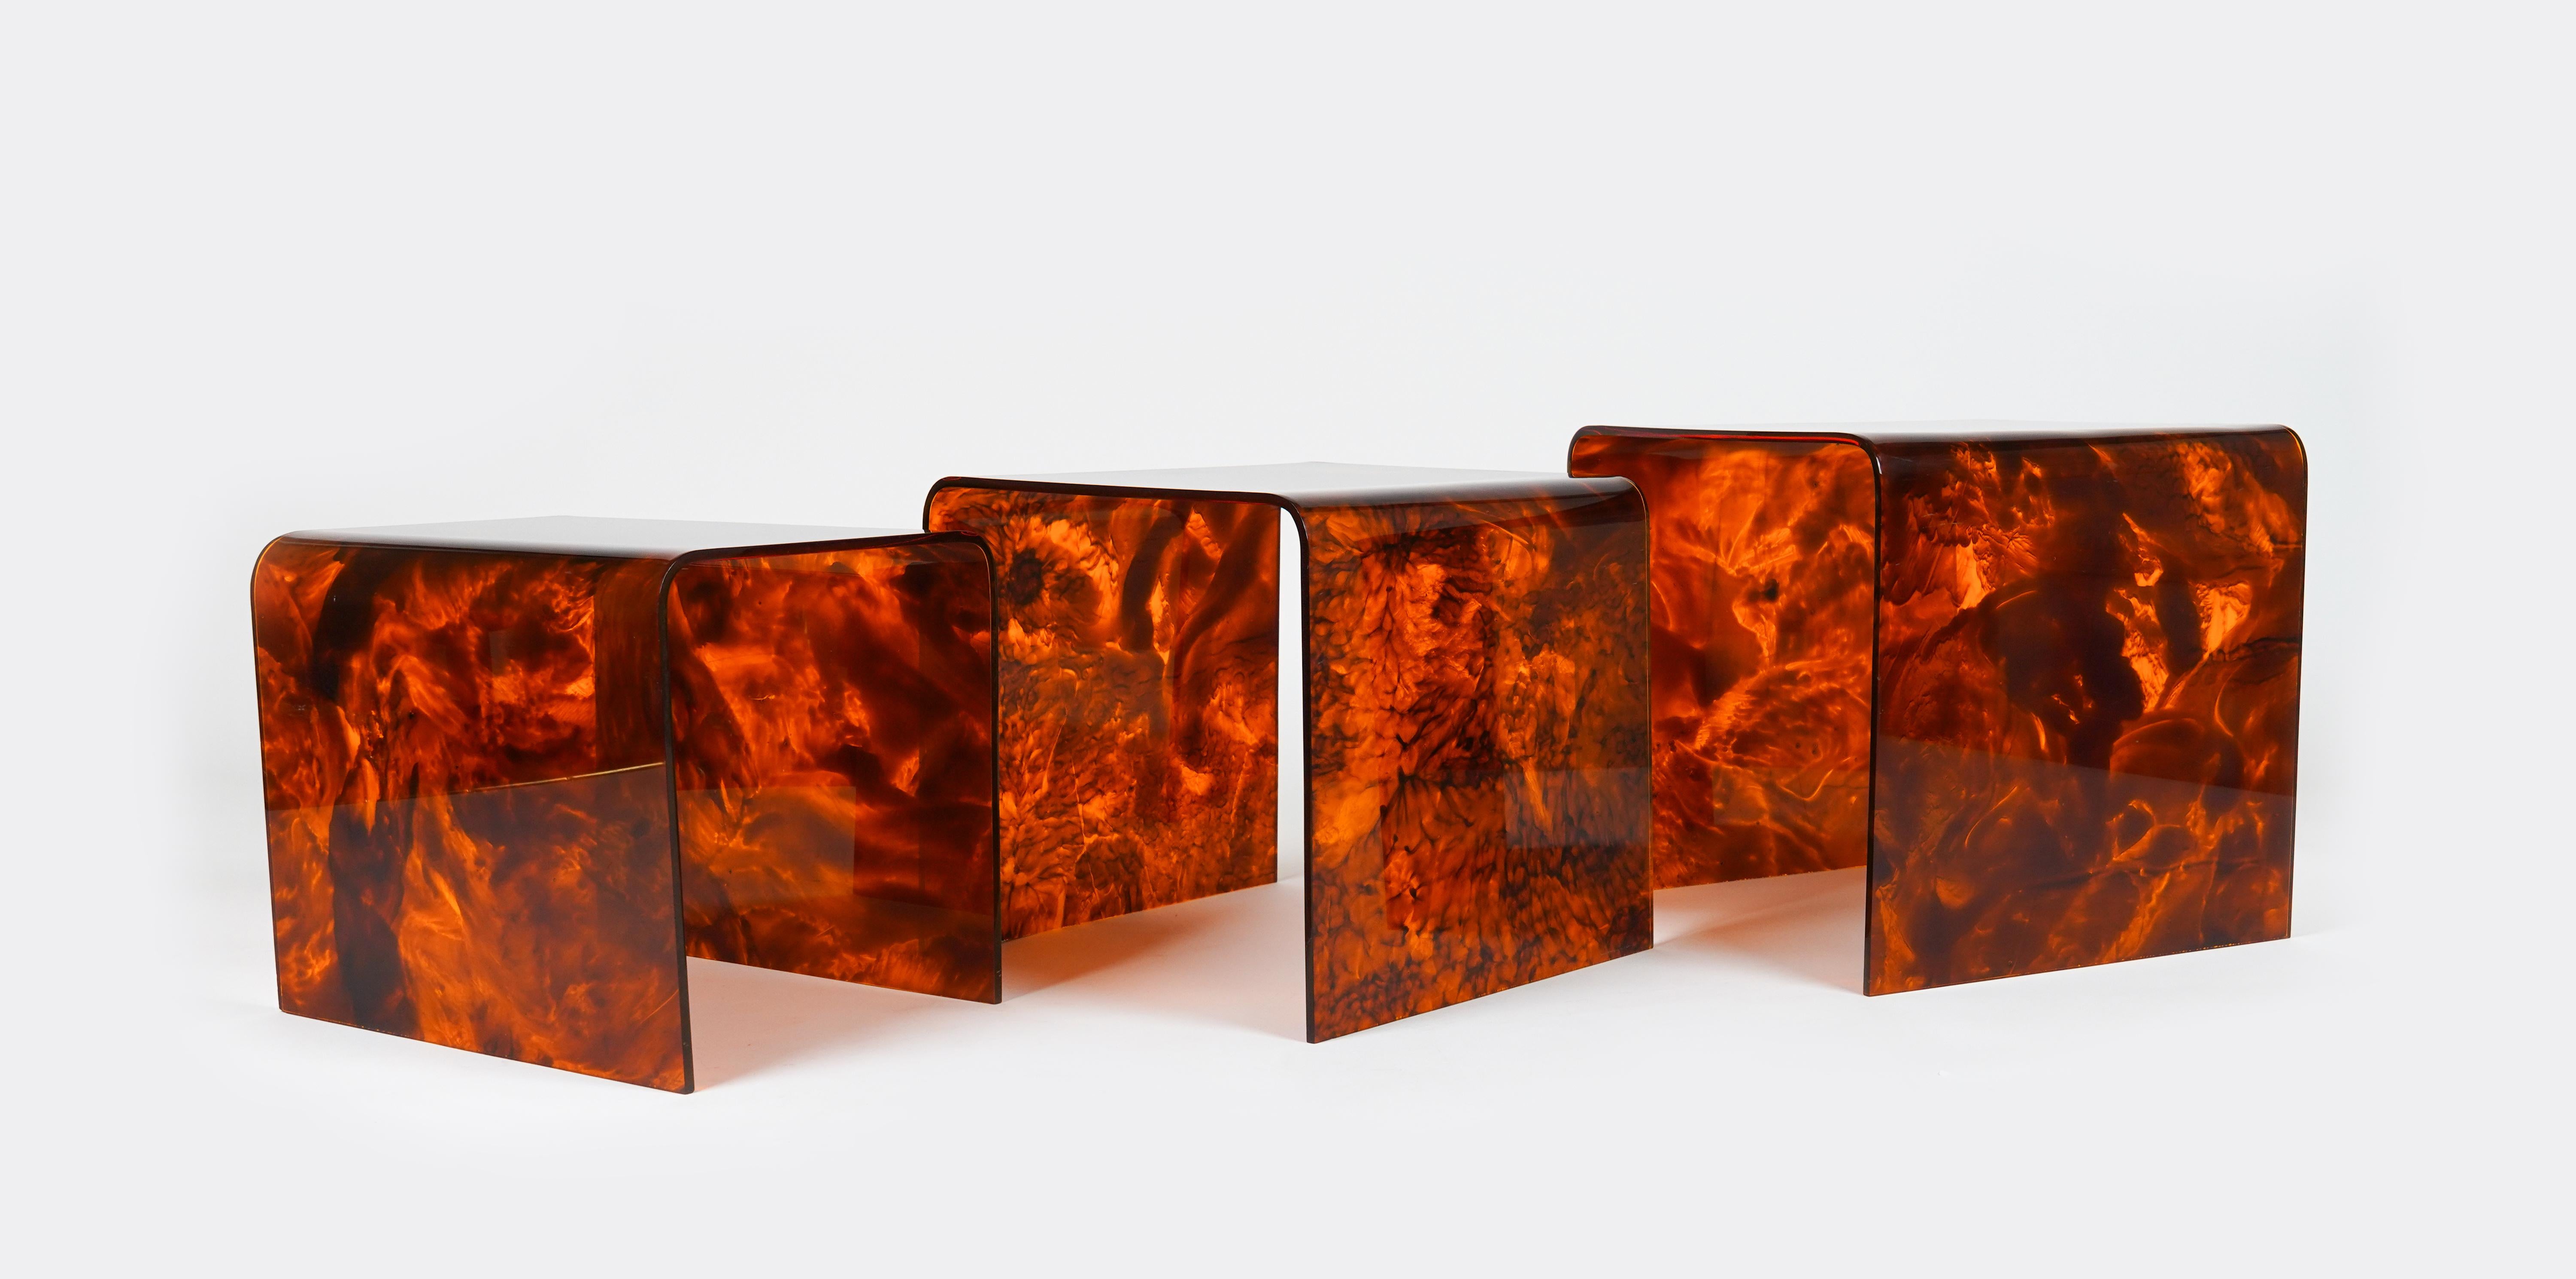 Set of 3 Nesting Tables in Lucite Faux Tortoiseshell Christian Dior, Italy 1970s For Sale 1